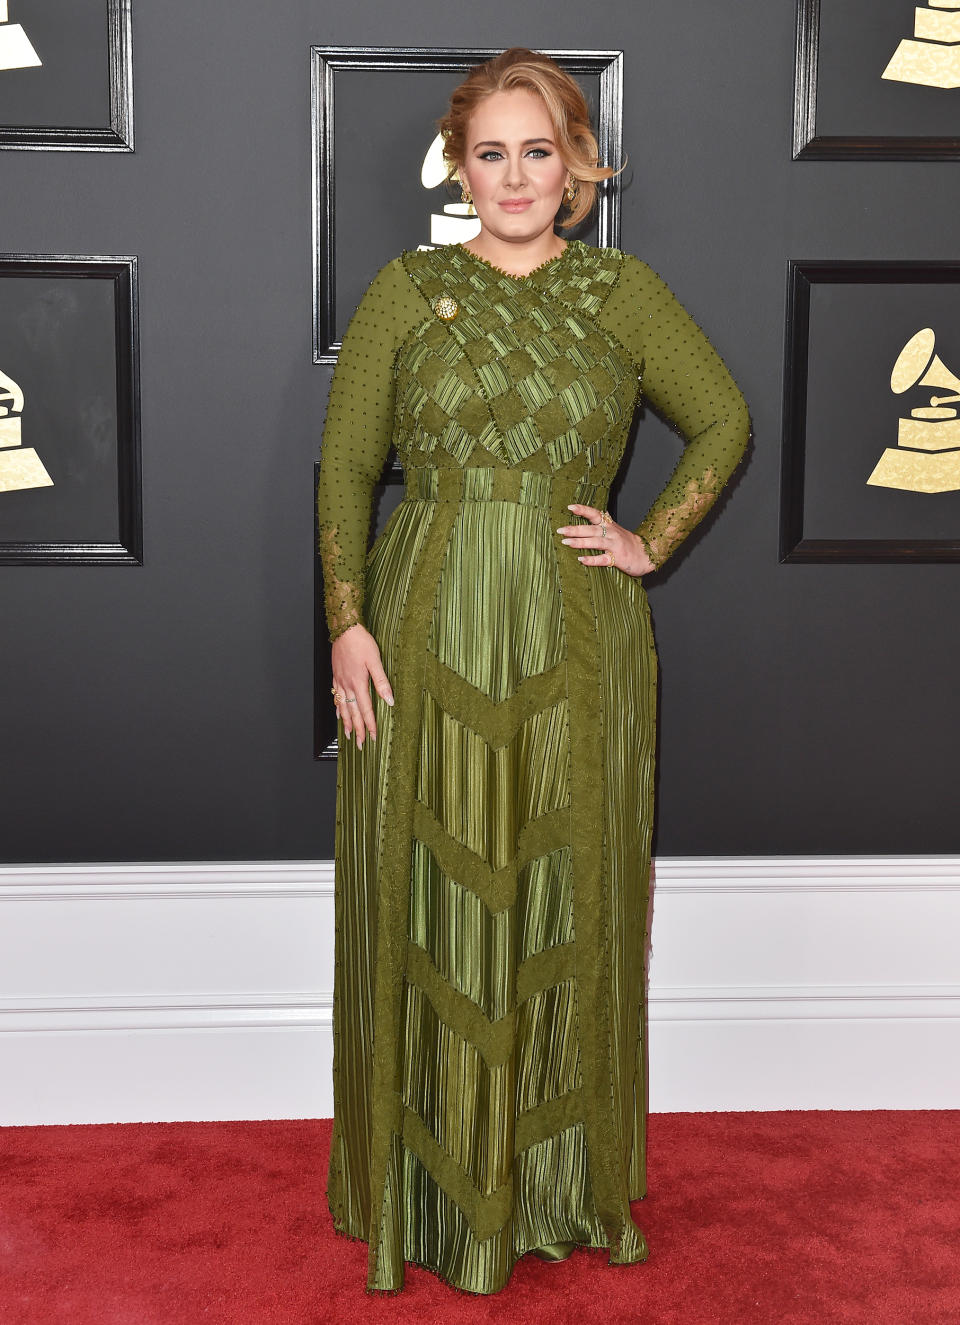 Adele a thte 59th Grammy Awards on February 12, 2017. (Axelle/Bauer-Griffin / FilmMagic)